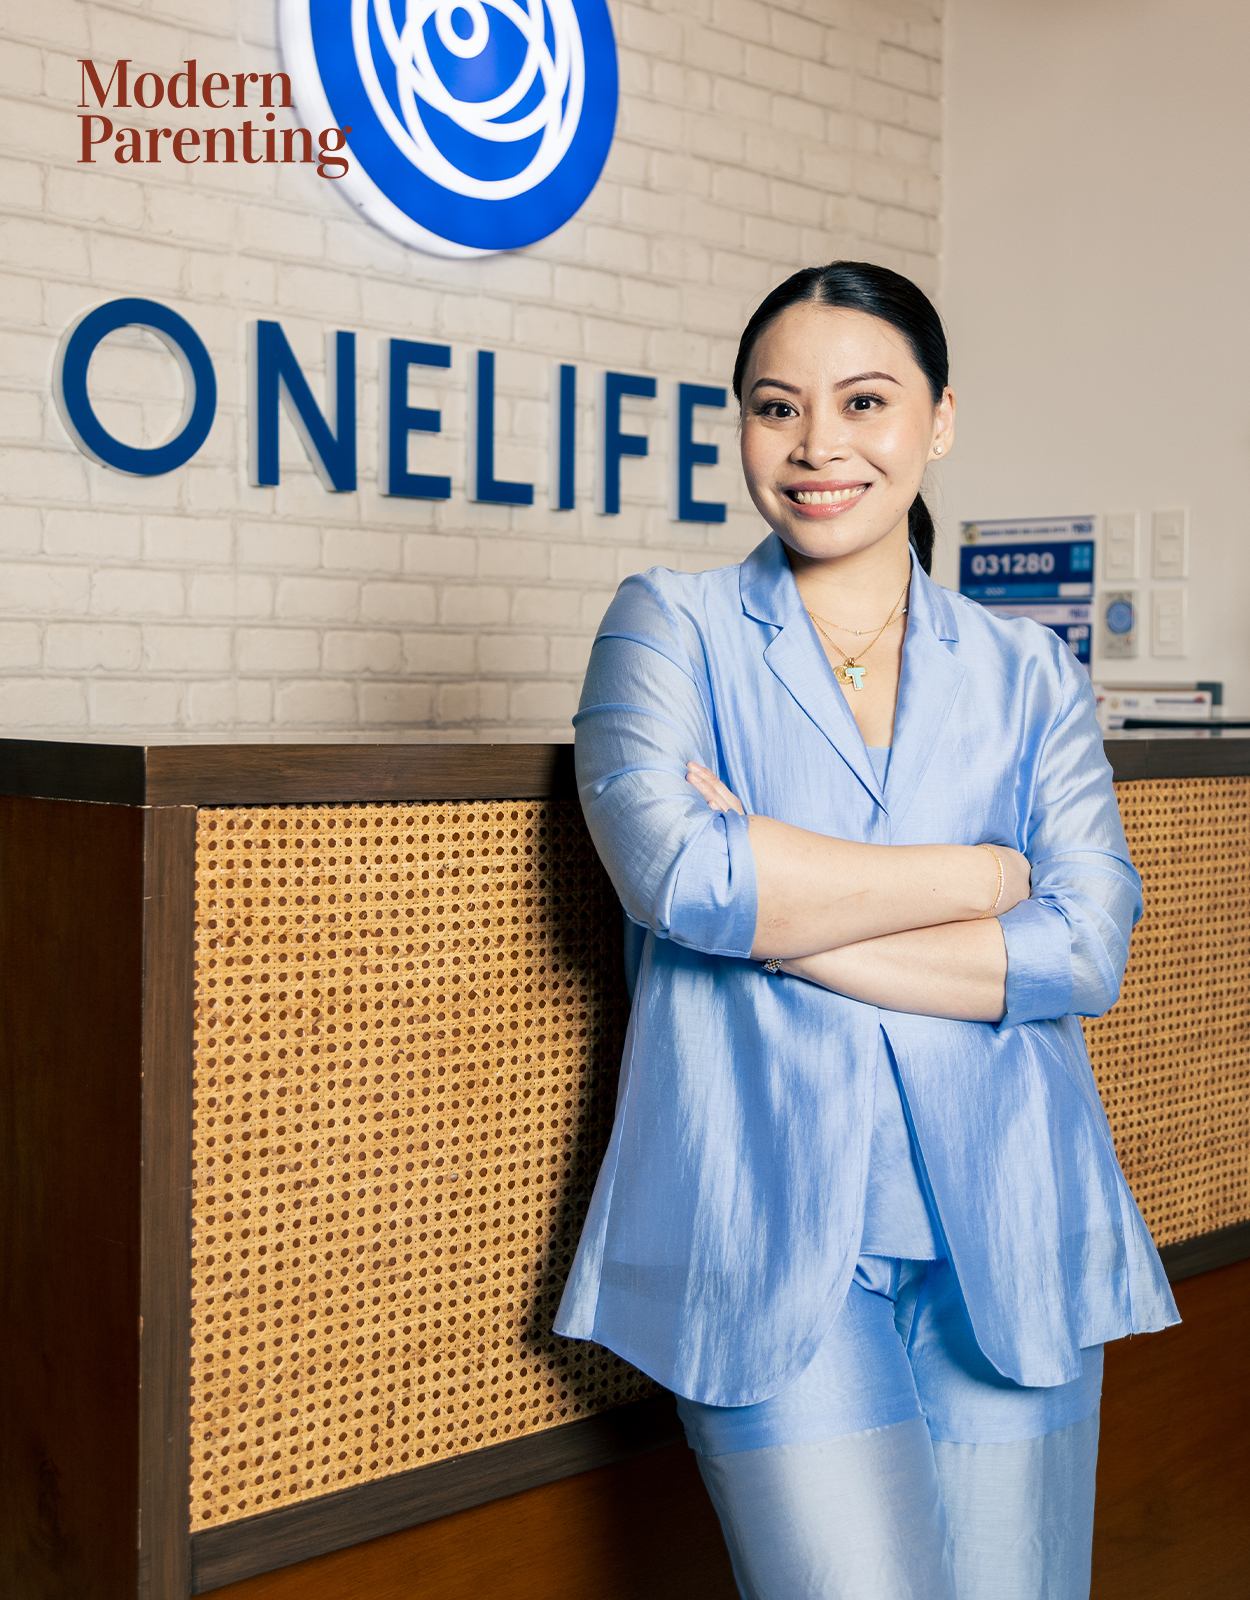 Tanya Aguila, Founder of Onelife